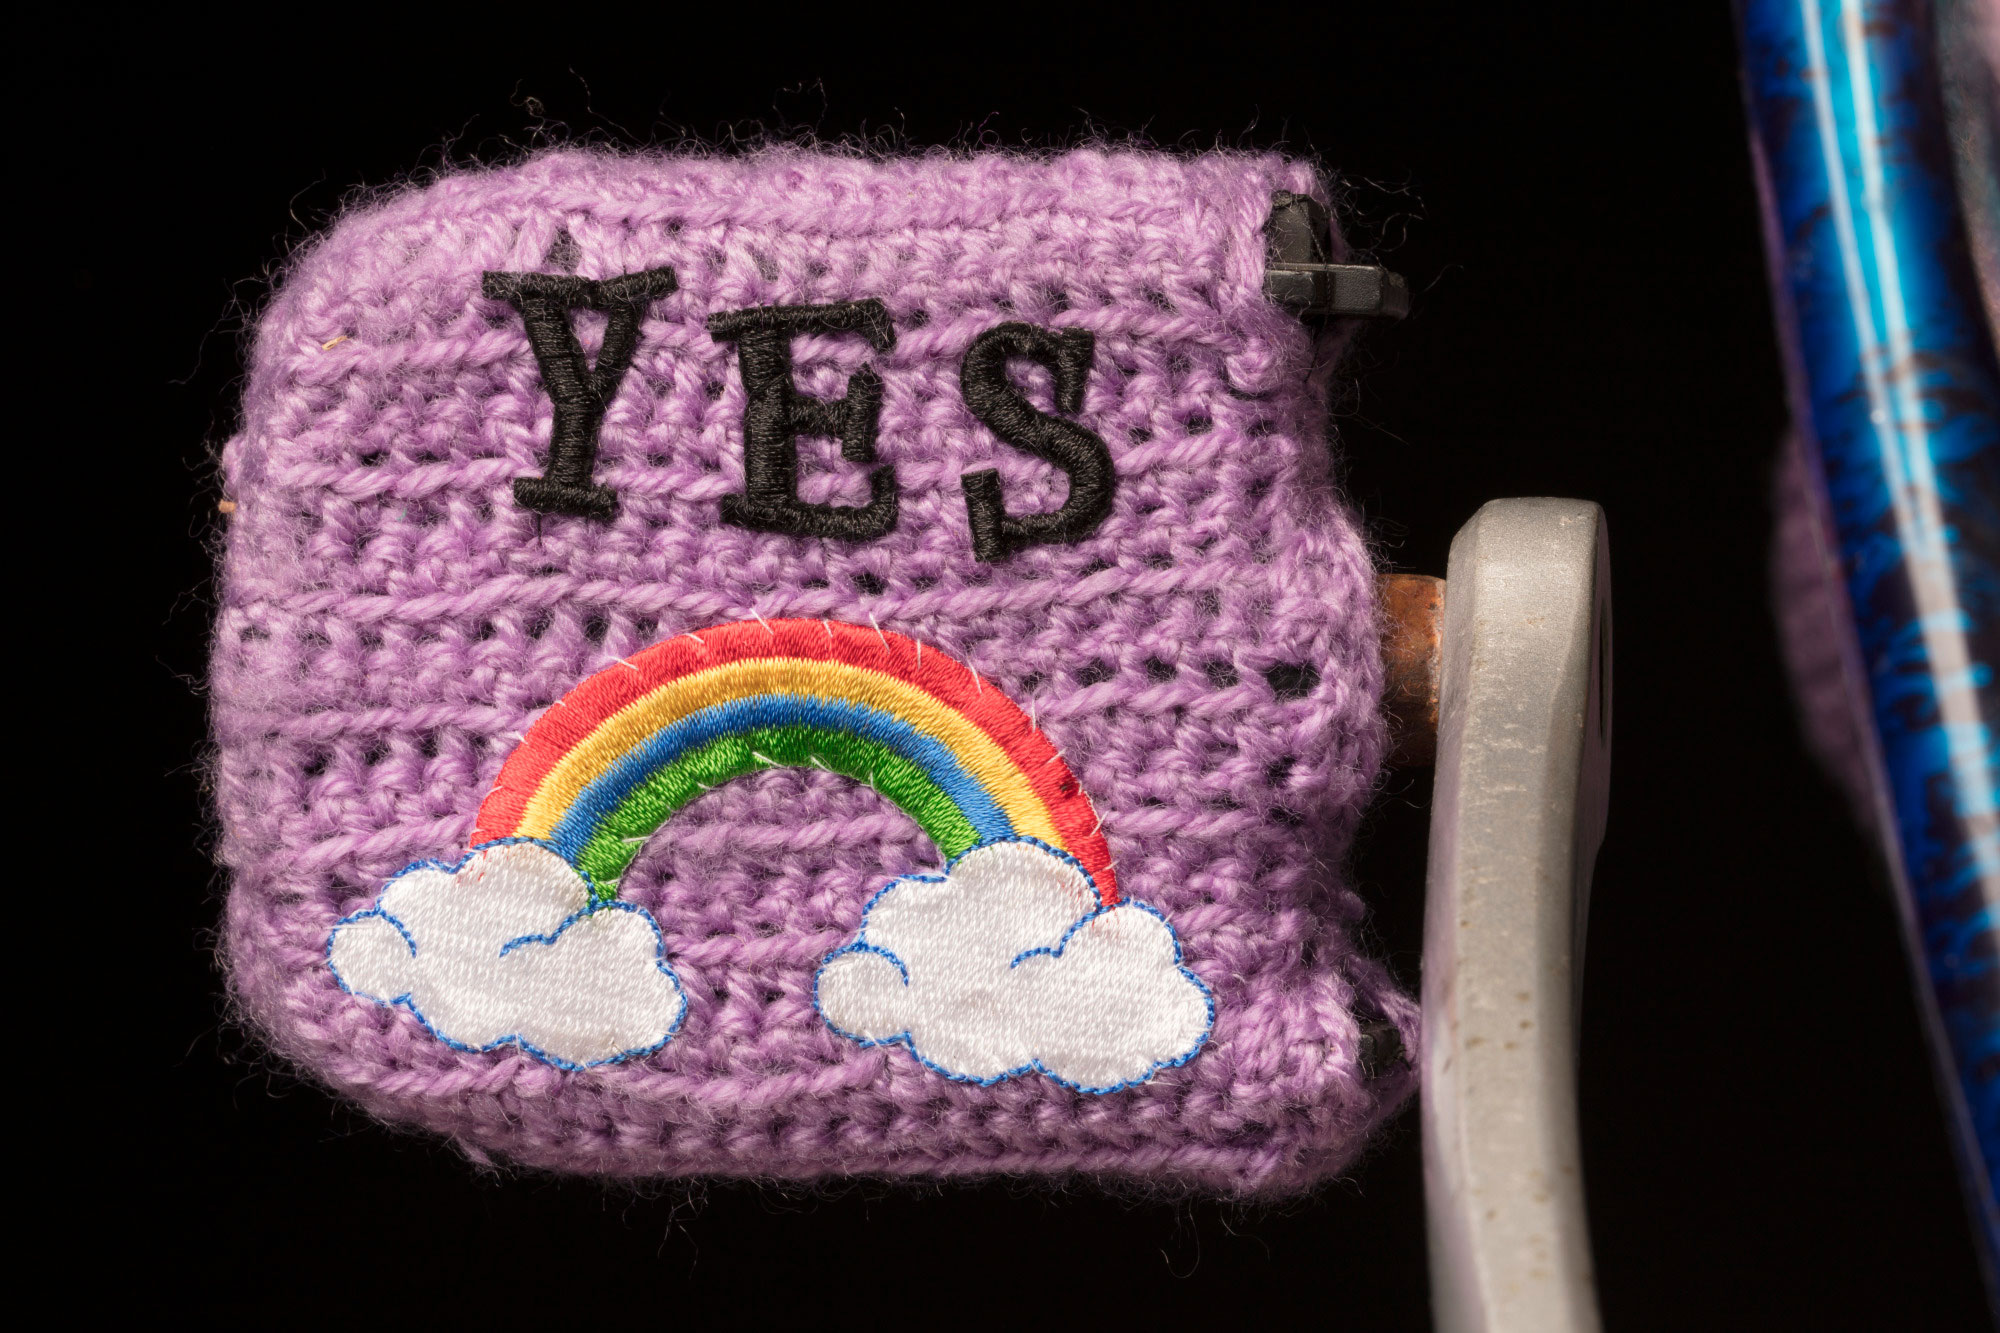 <p>Bike pedal covered in woollen crochet and the word ‘yes’ embroidered on it</p>
